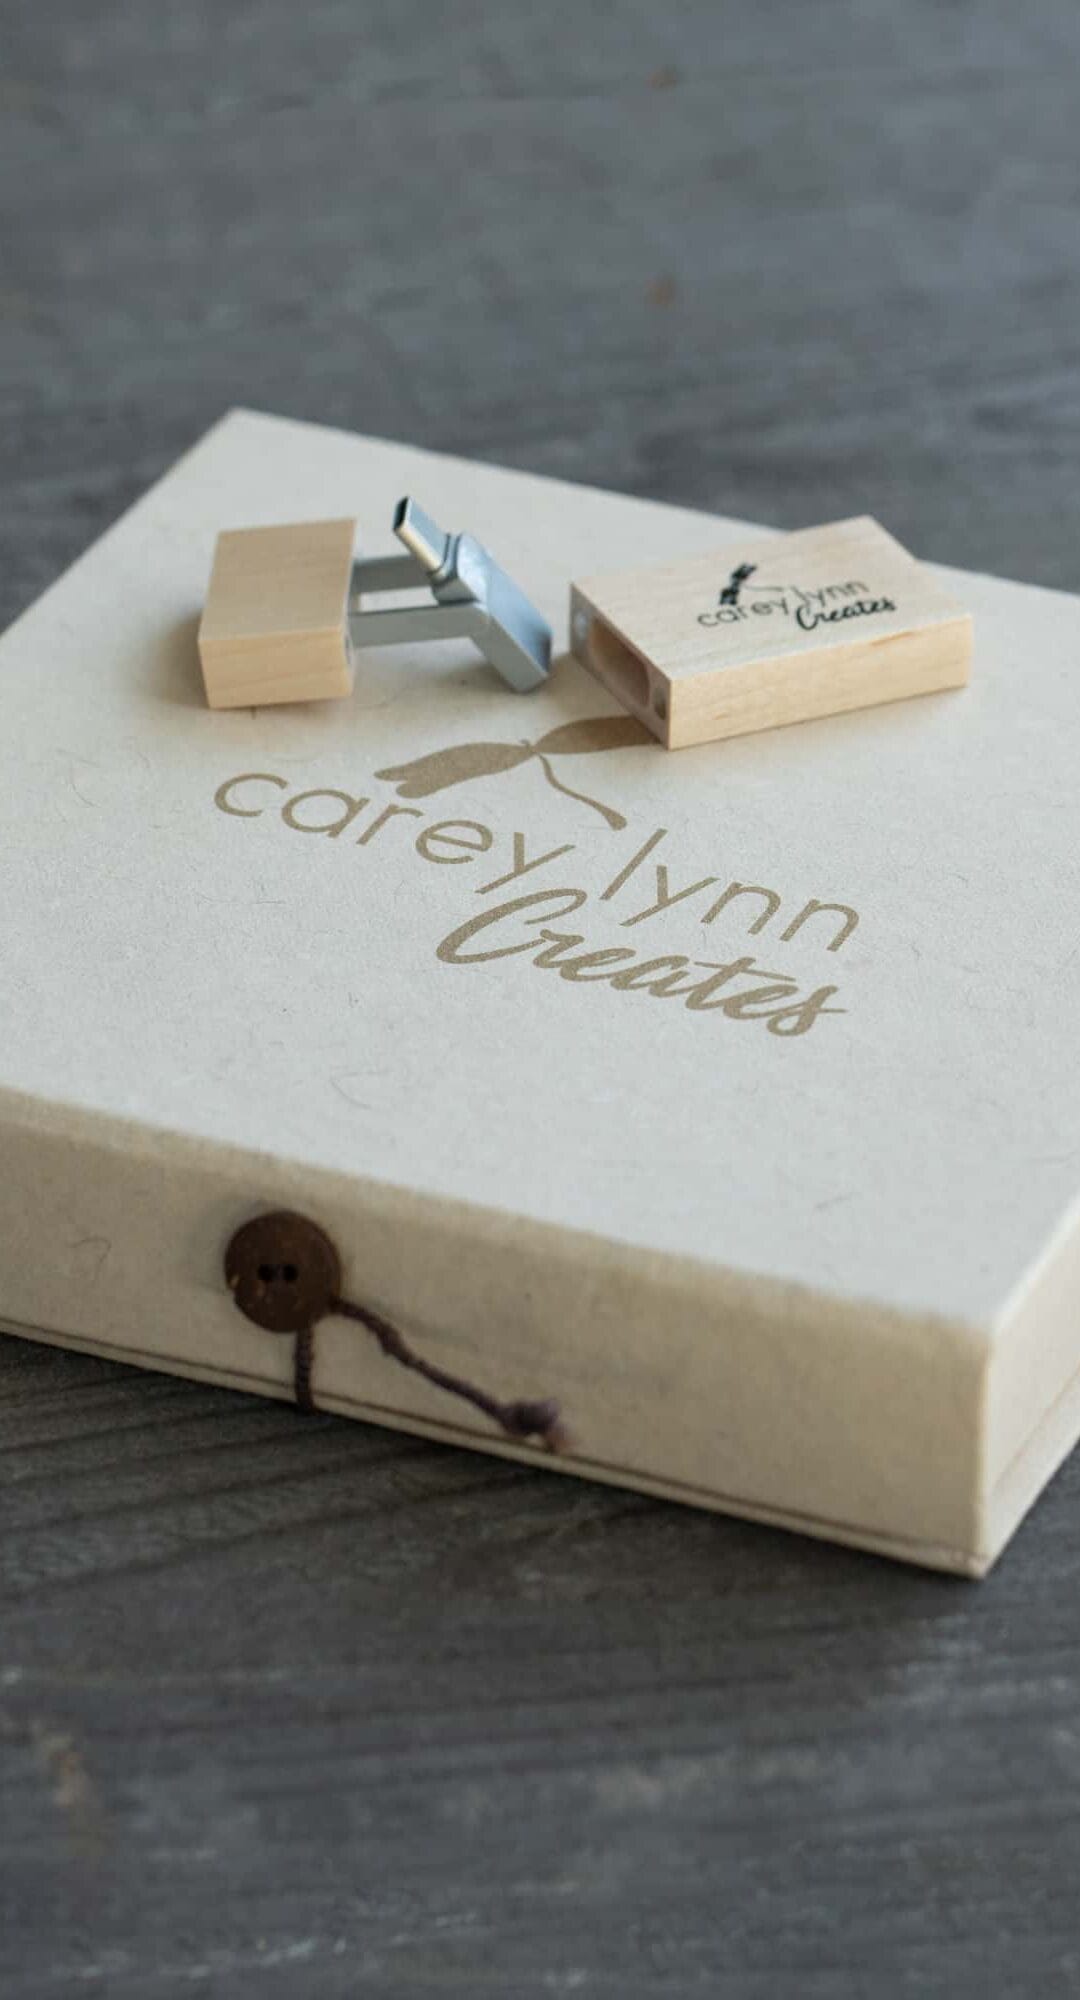 Handcrafted USB Drive Box and Prints